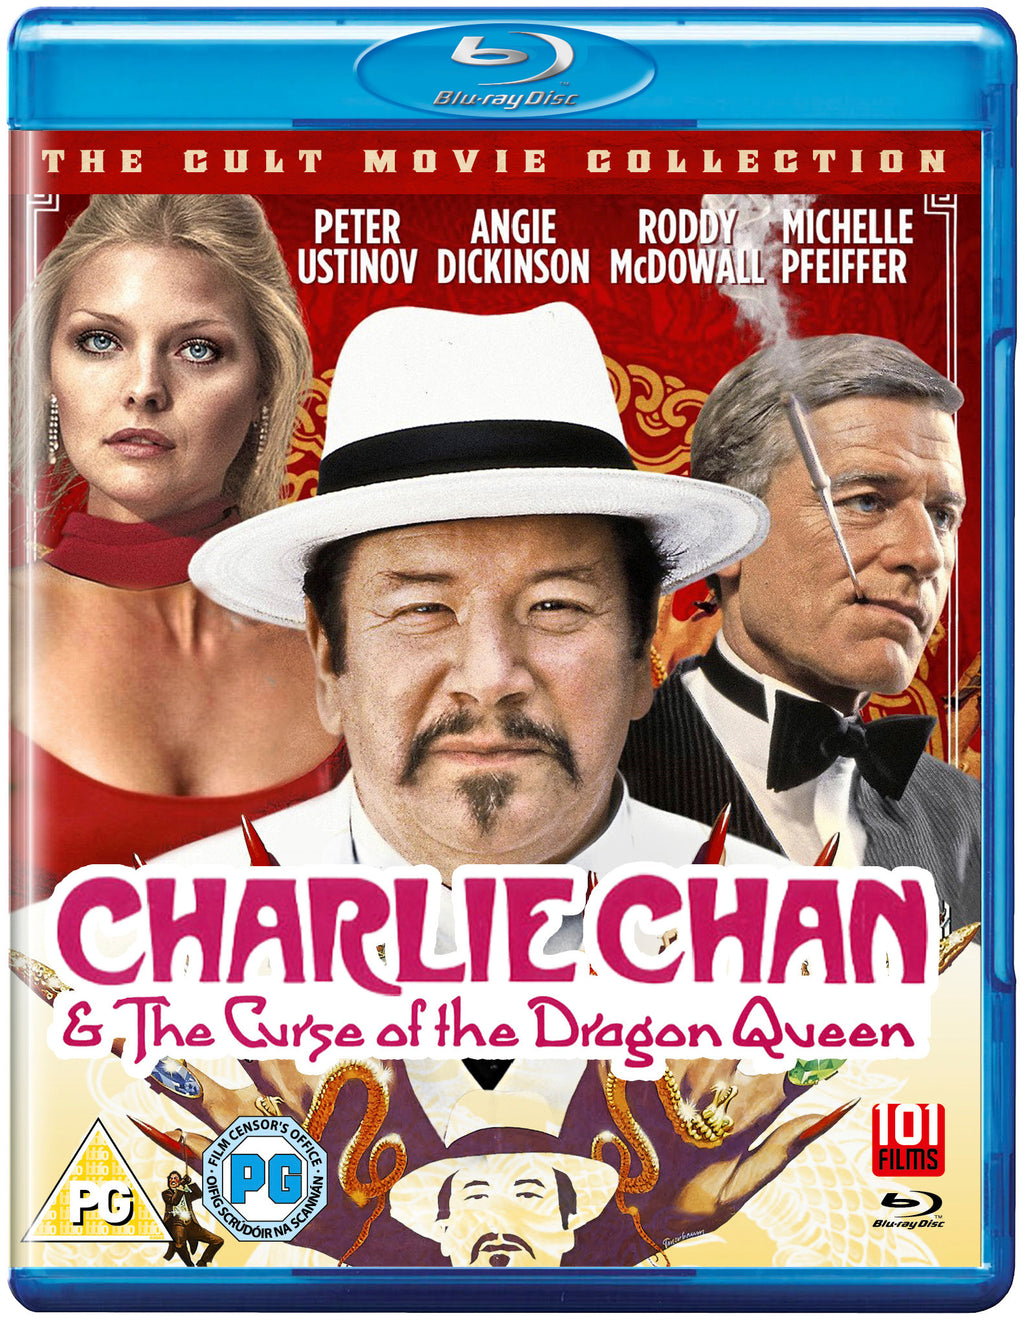 Charlie Chan & the Curse of the Dragon Queen (1981) (Blu-ray)